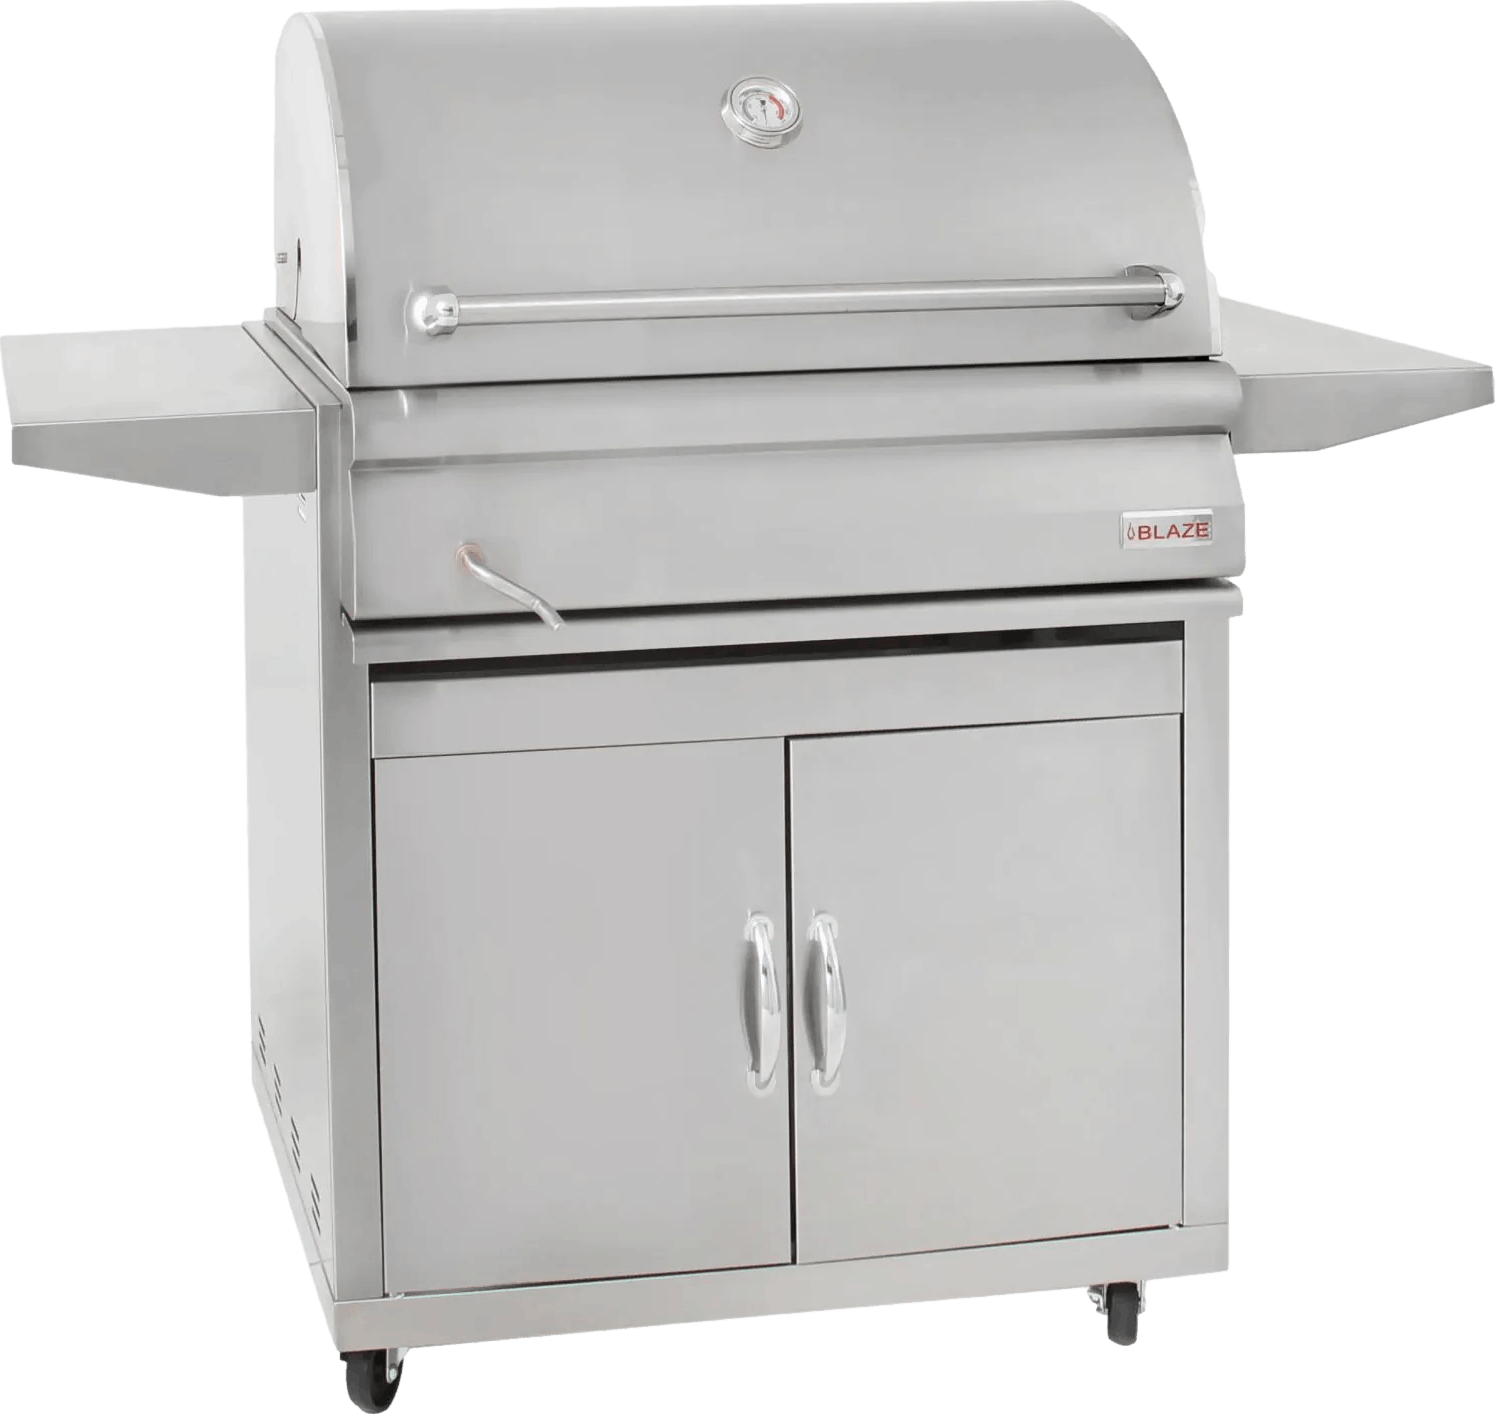 Blaze Built-In Stainless Steel Charcoal Grill with Adjustable Charcoal Tray · 32 in.